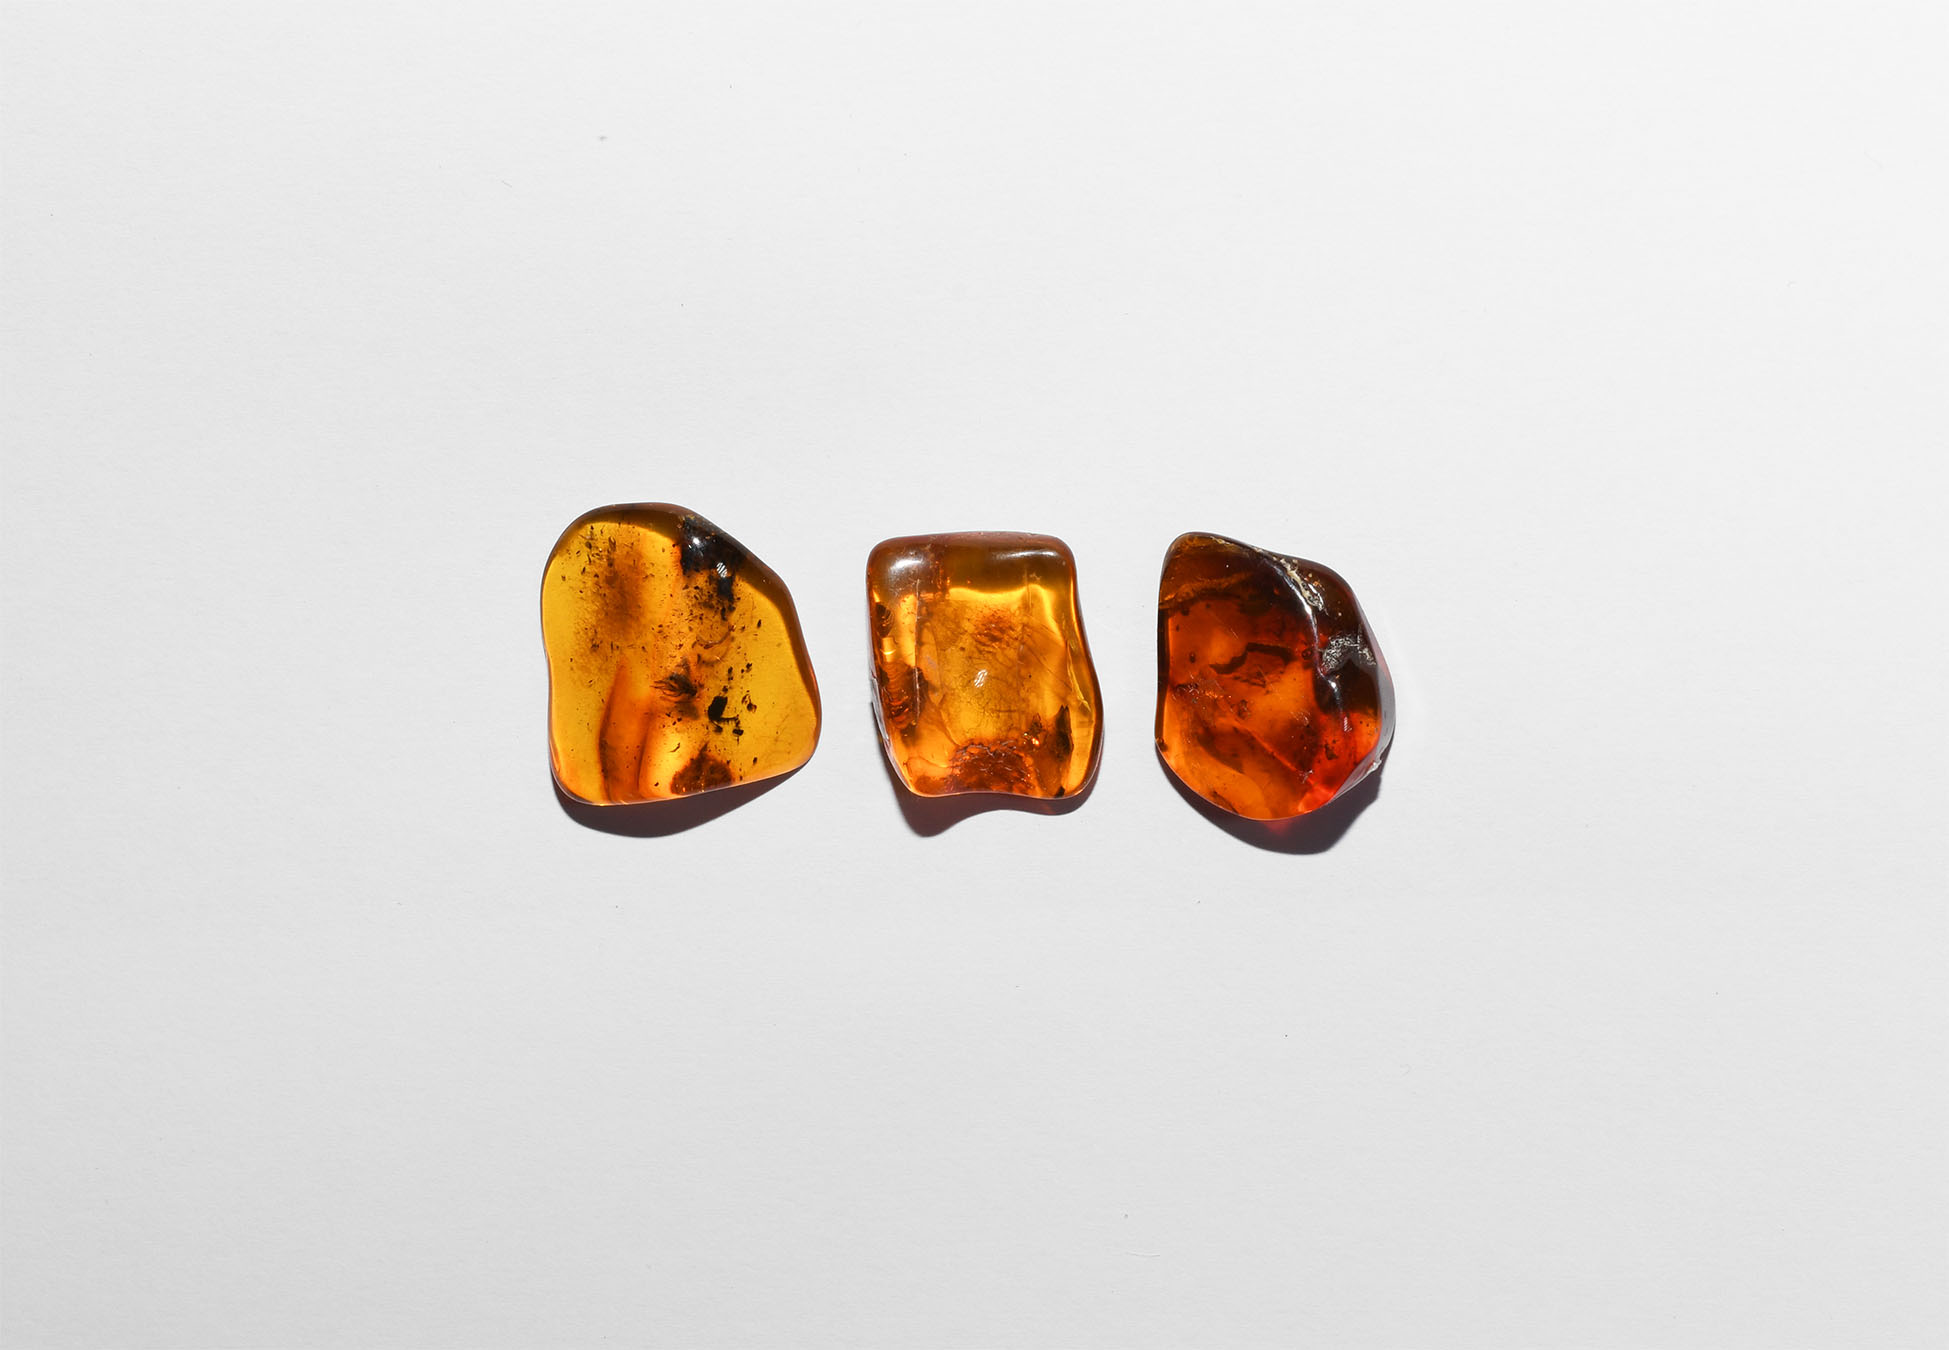 Natural History - Polished Baltic Amber Pieces with Flies and Spider